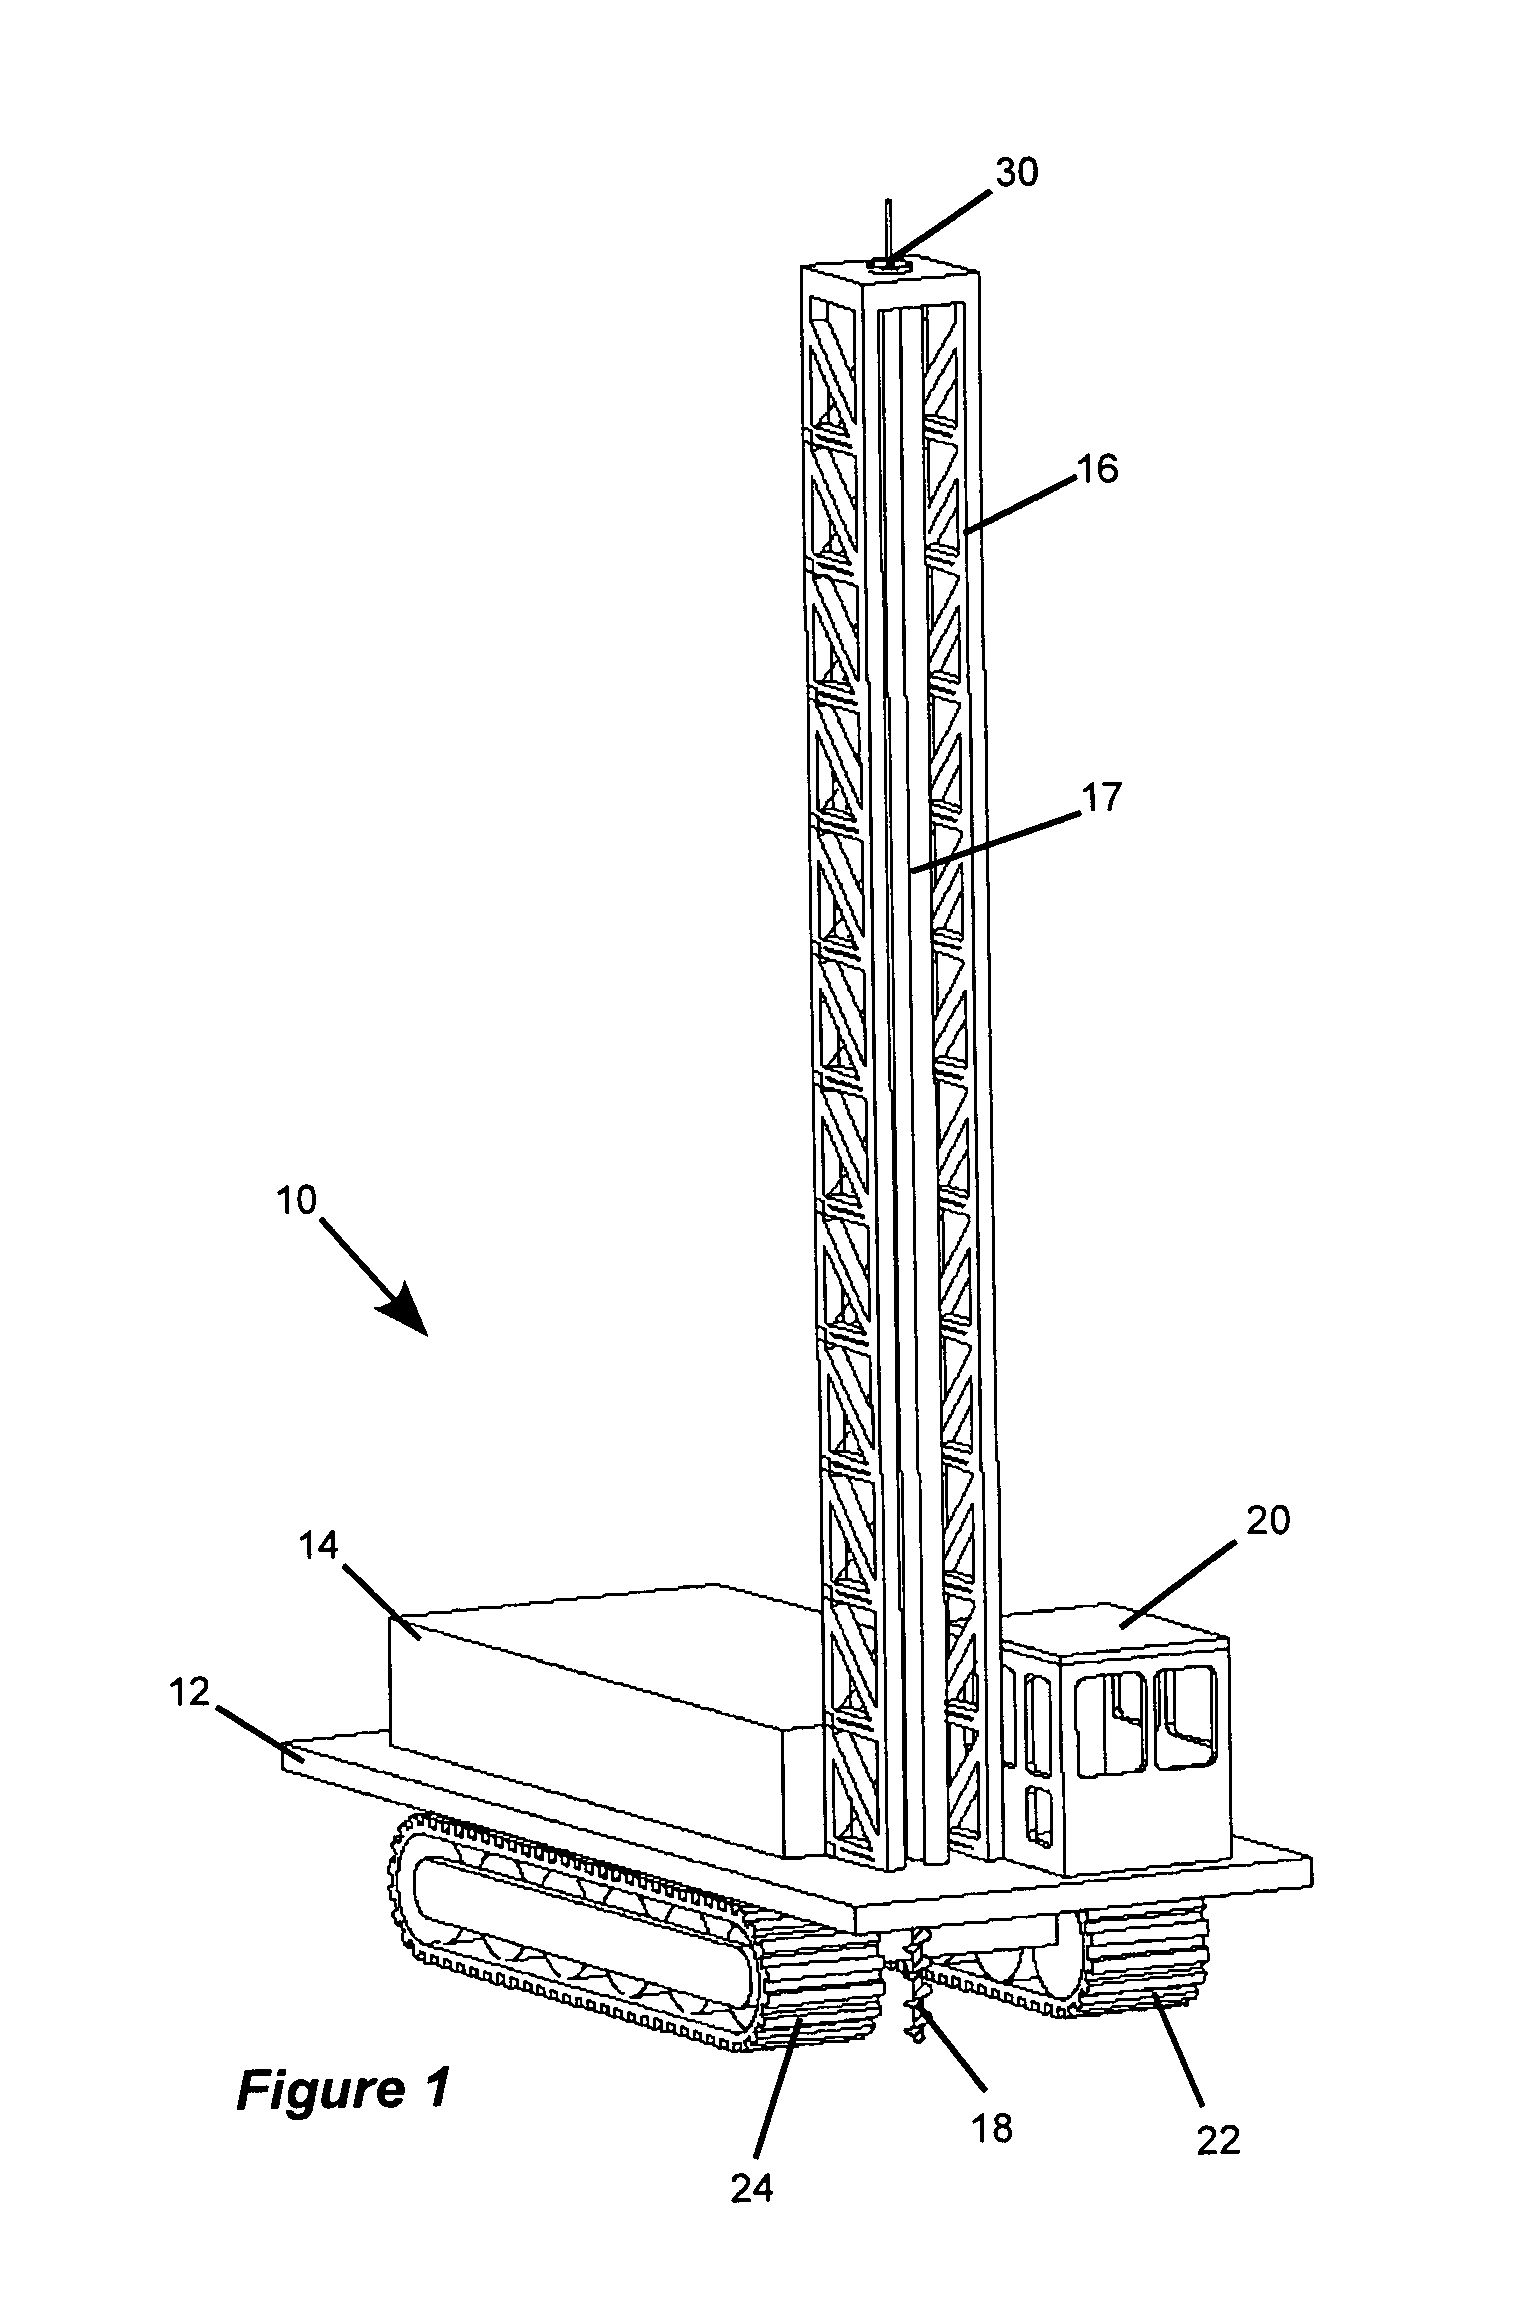 System and method for autonomous navigation of a tracked or skid-steer vehicle